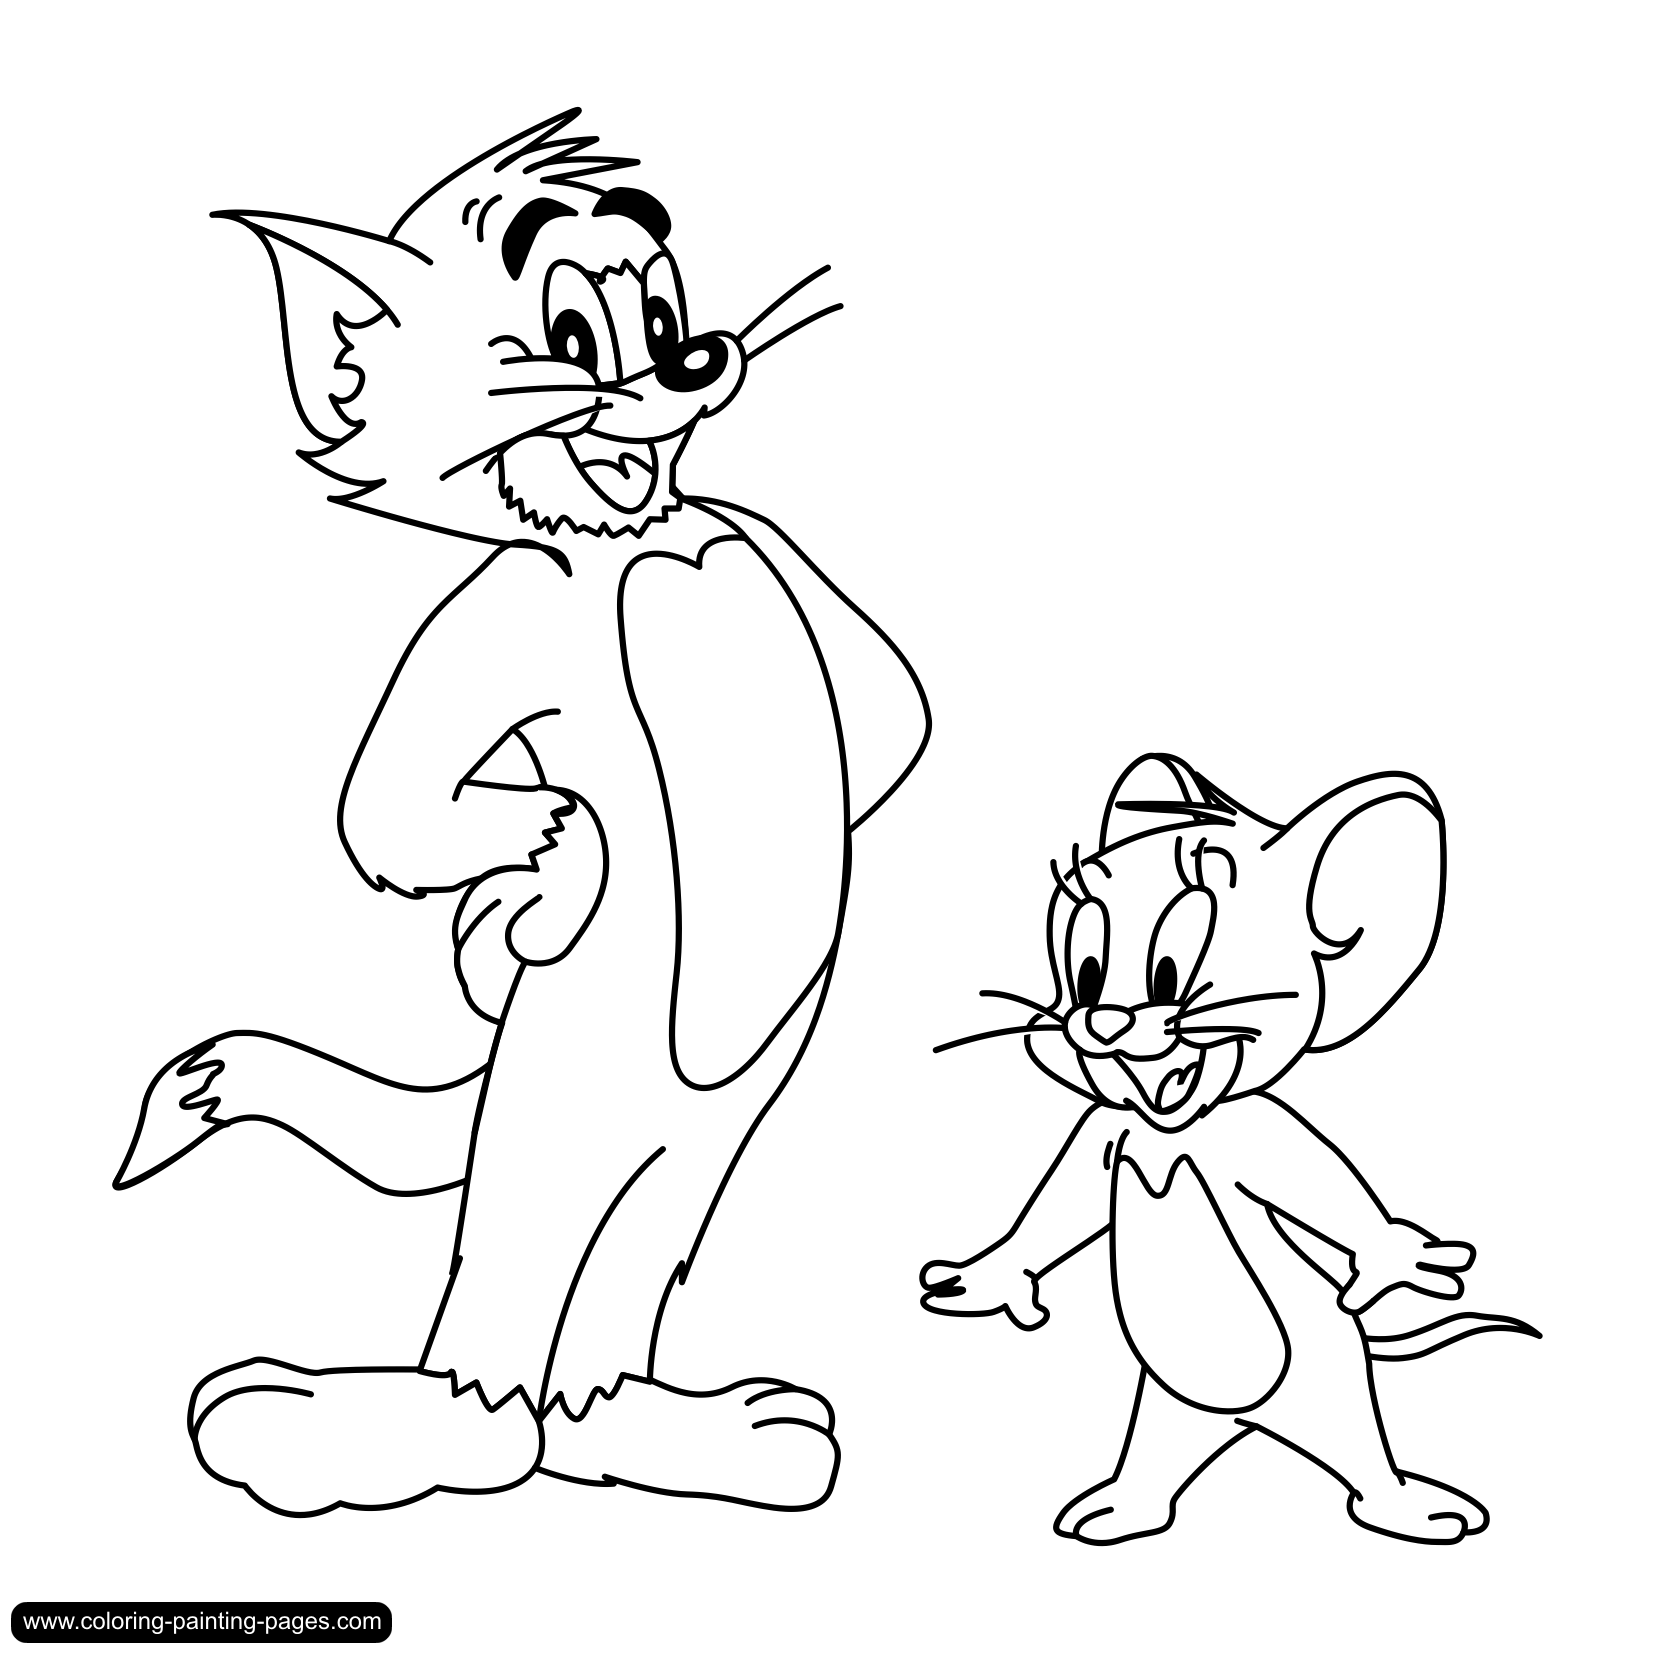 Drawing Tom and Jerry #24273 (Cartoons) – Printable coloring pages